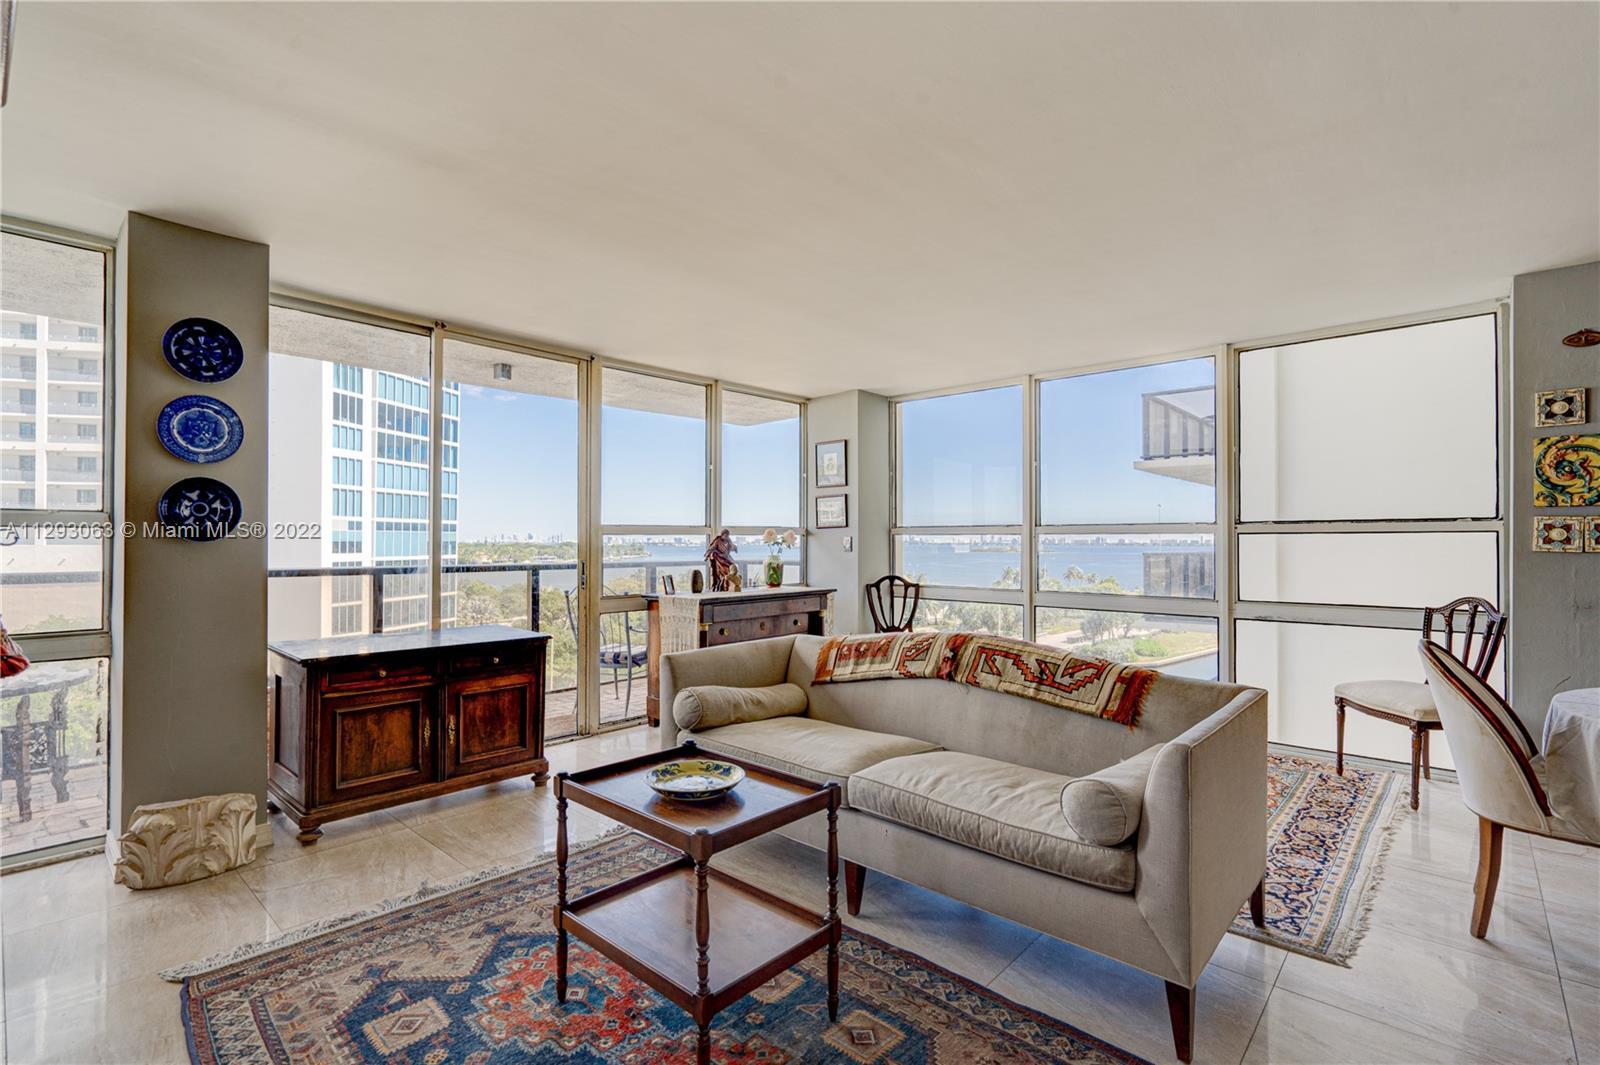 Motivated seller! Enjoy beautiful views of Biscayne Bay from this spacious 2 bedroom/2 bath + office